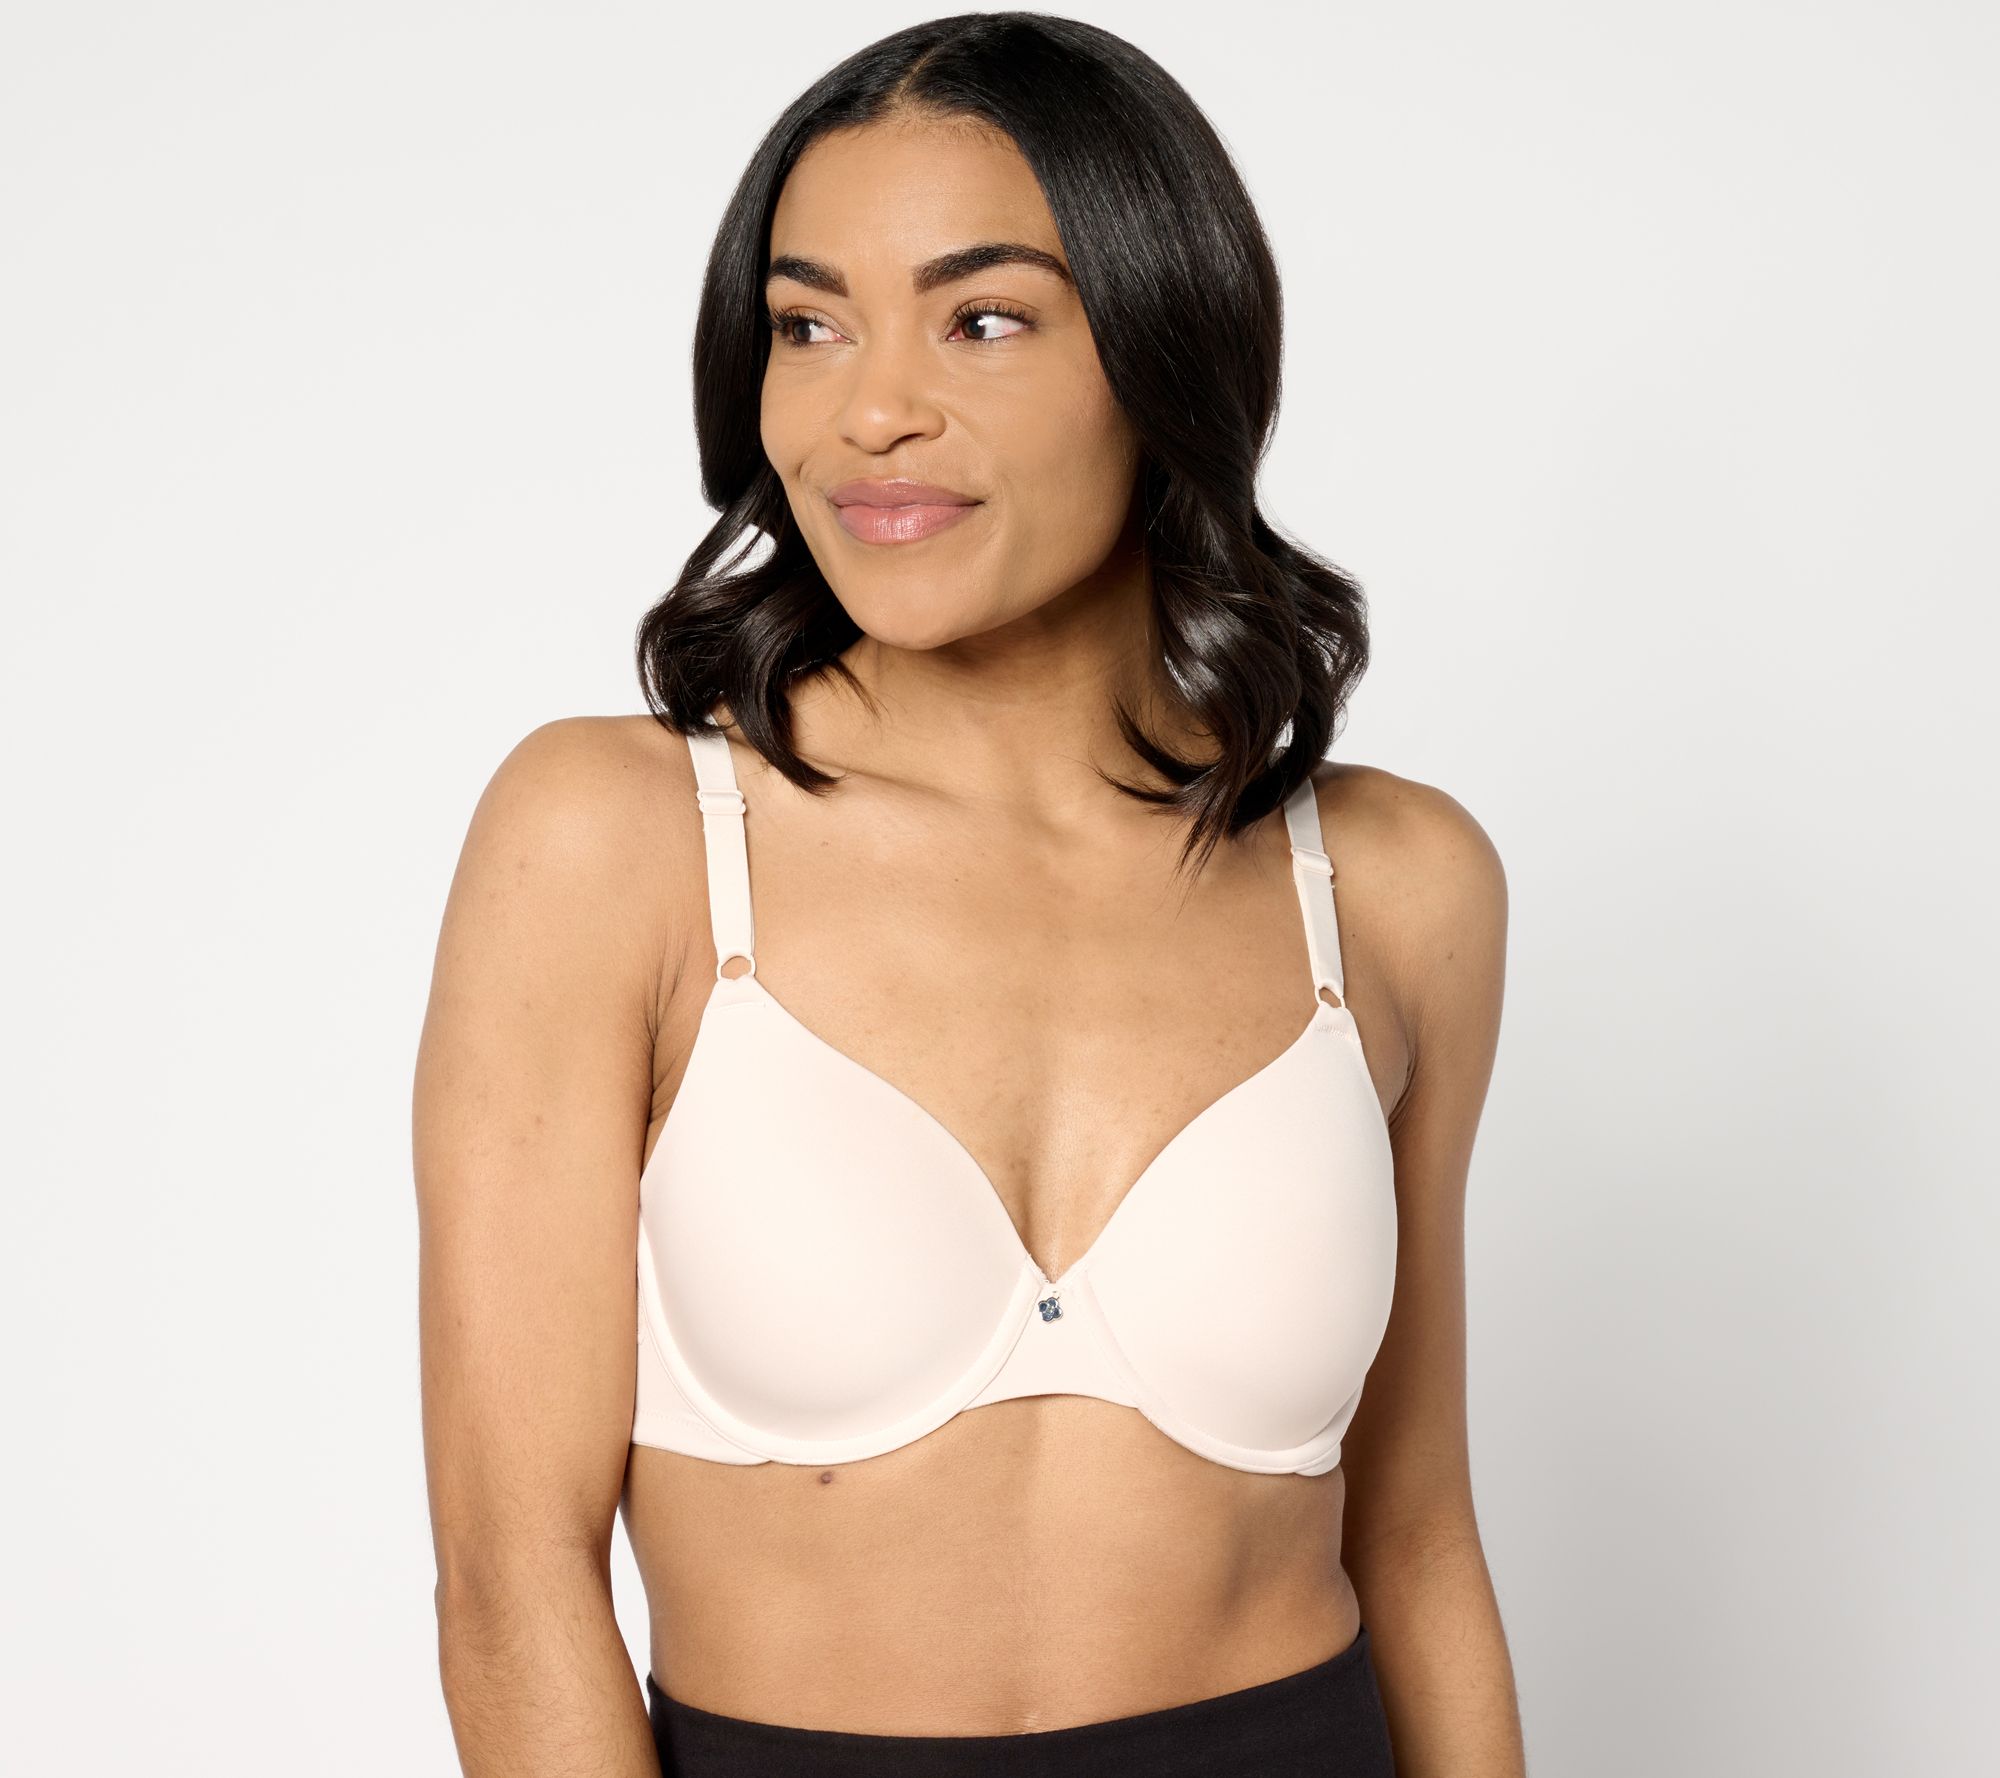 ORIGINAL QVC BREEZIES LACE TRIM SUPPORT BRA W/ ULTIMAIR CUP LINING- CHOICE  $38